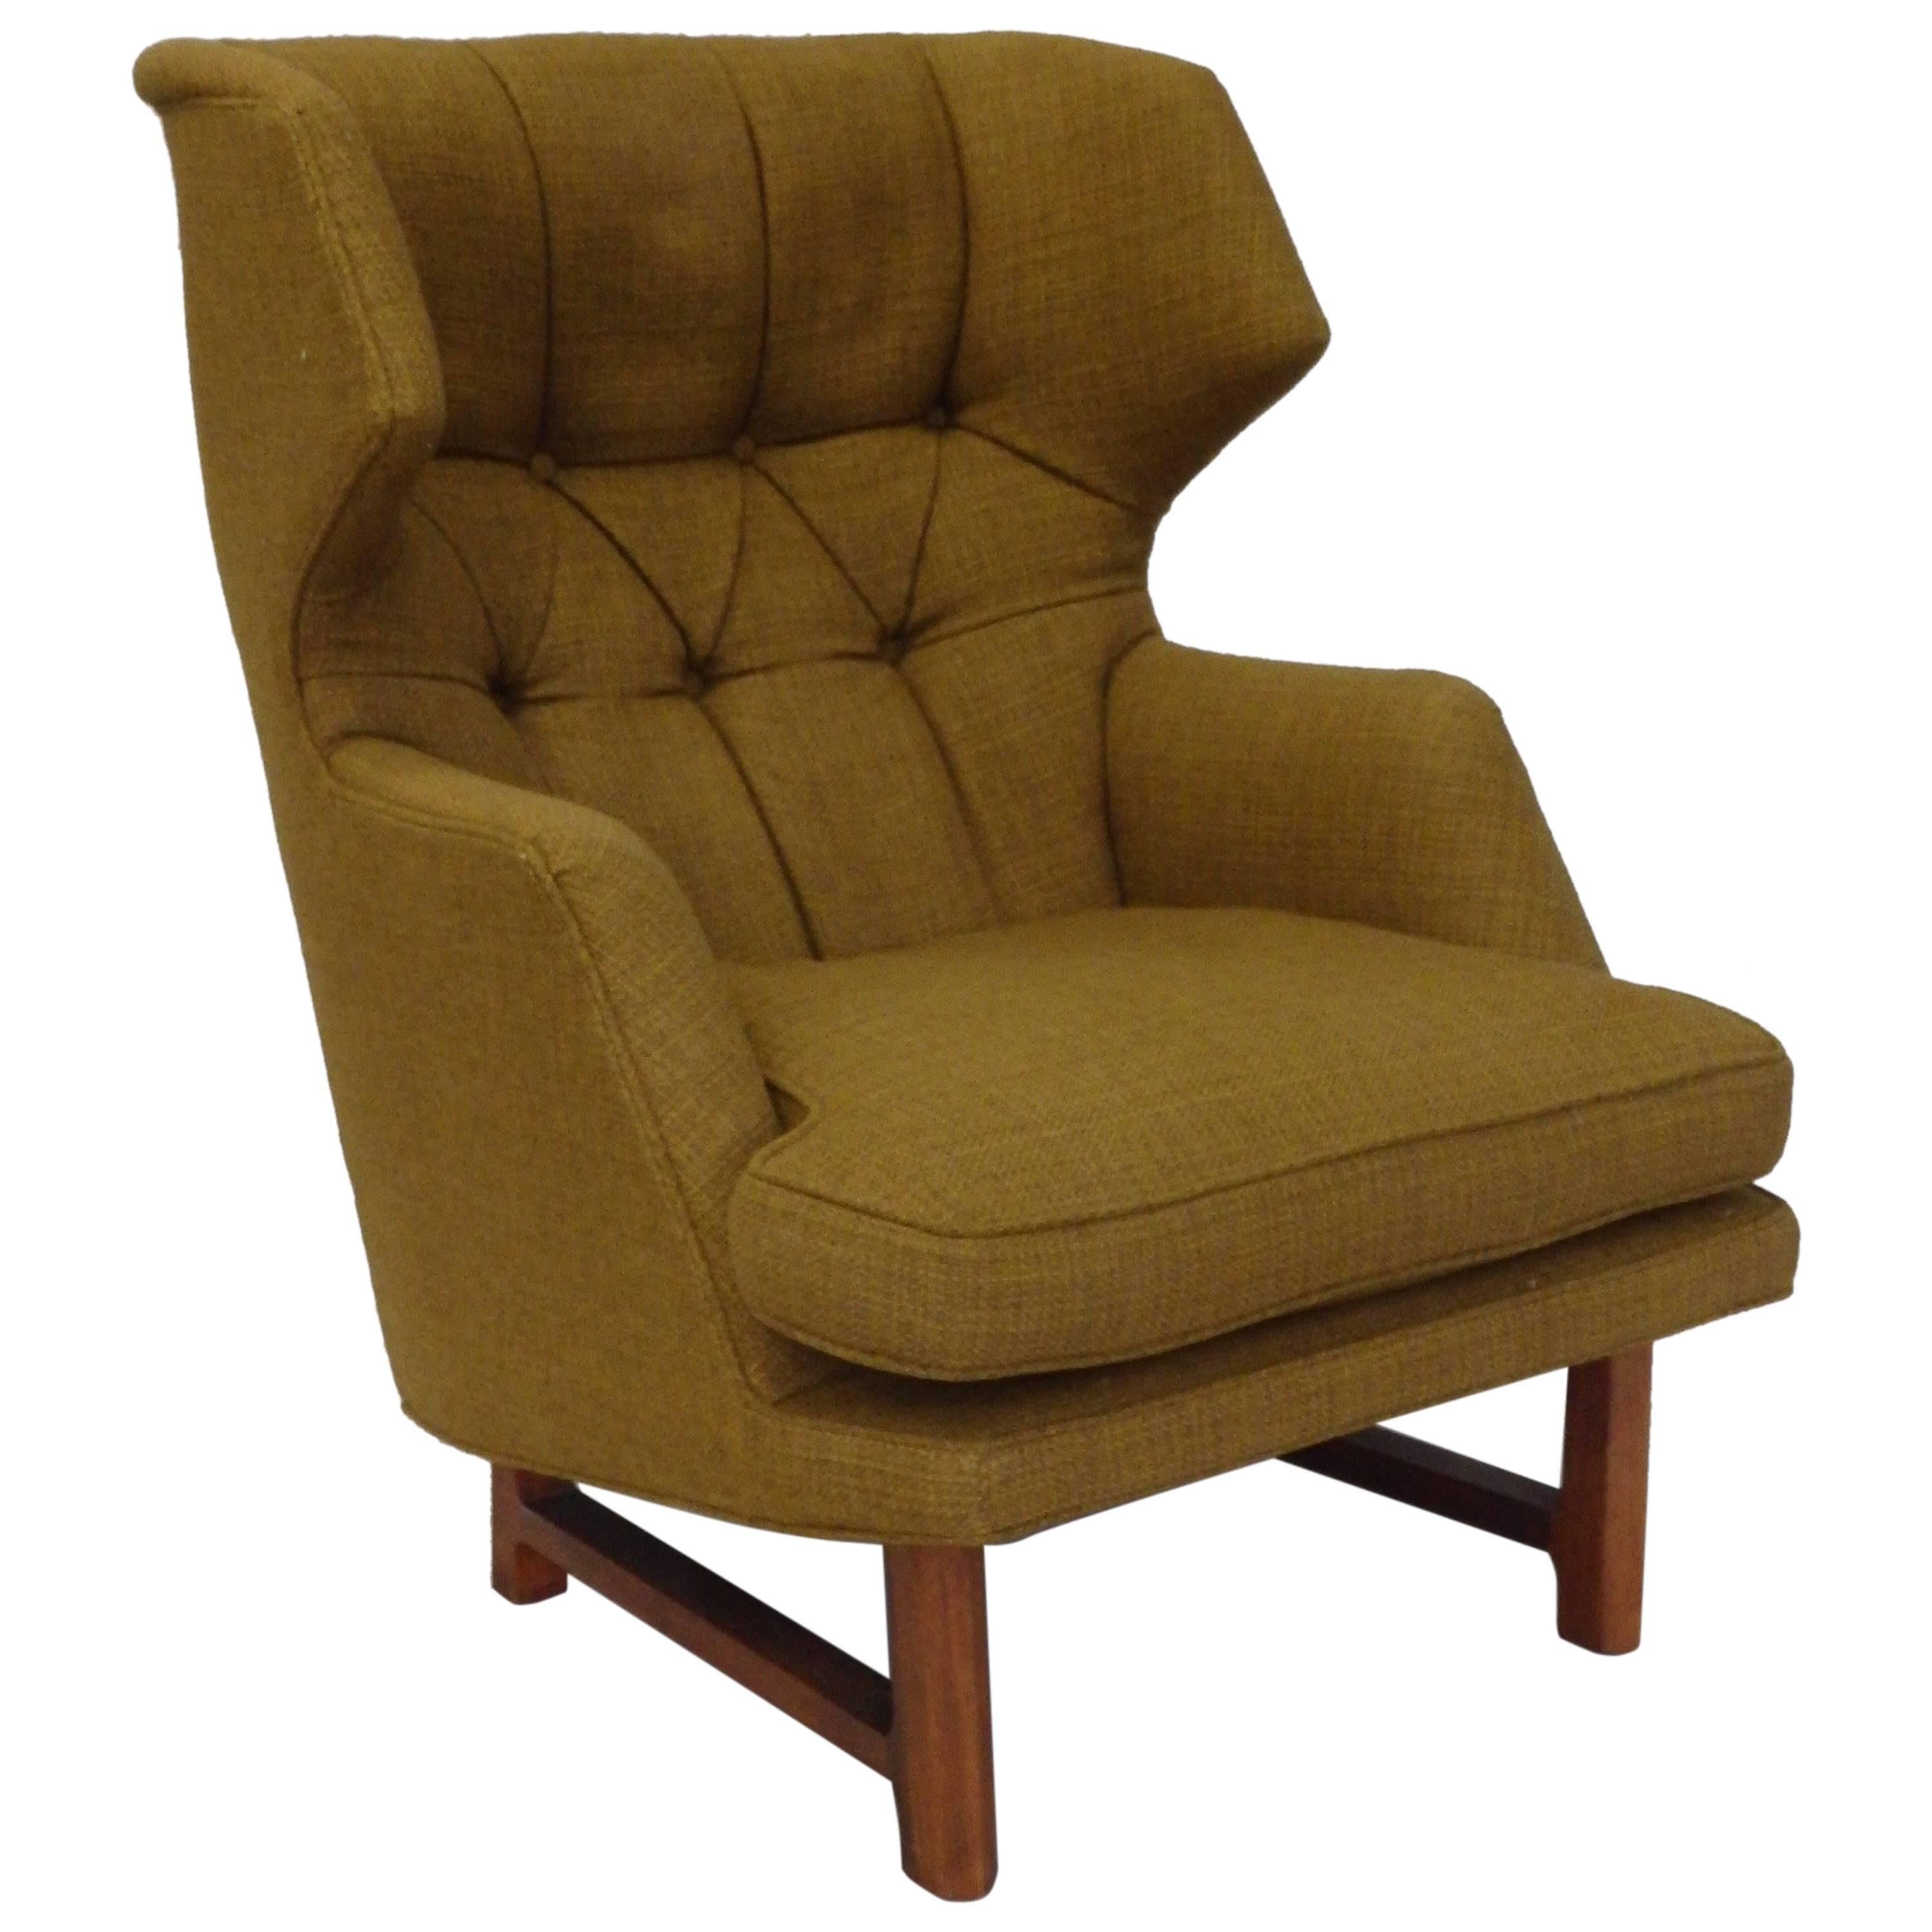 Edward Wormley for Dunbar Modernist Janus collection Wingback Lounge Chair